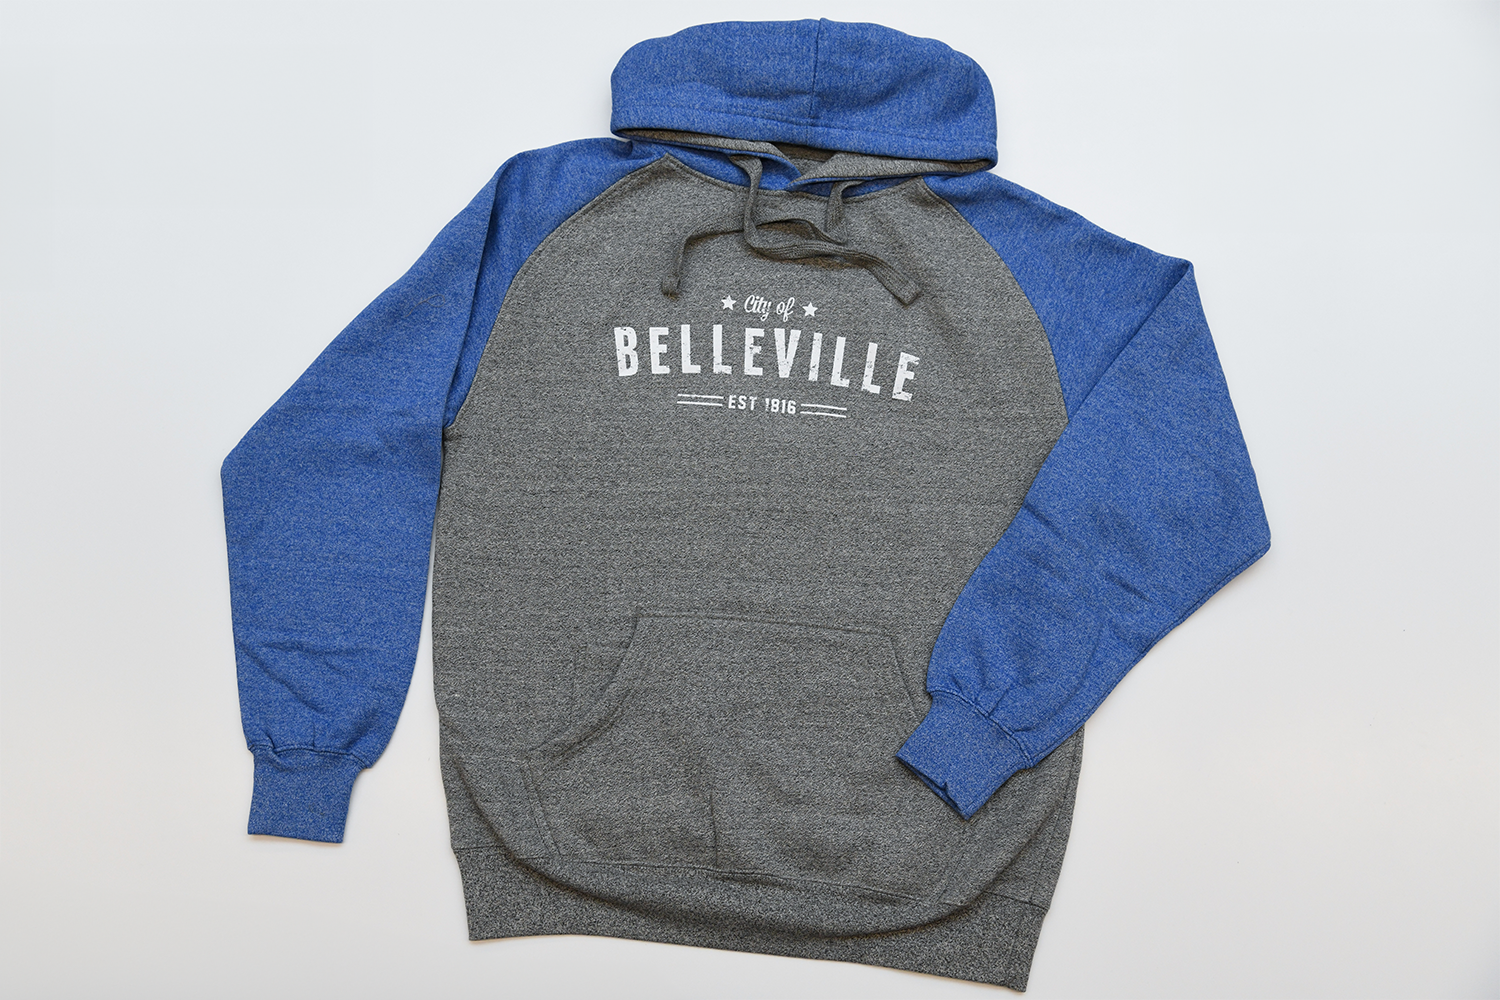 Grey and blue City of Belleville hoodie.